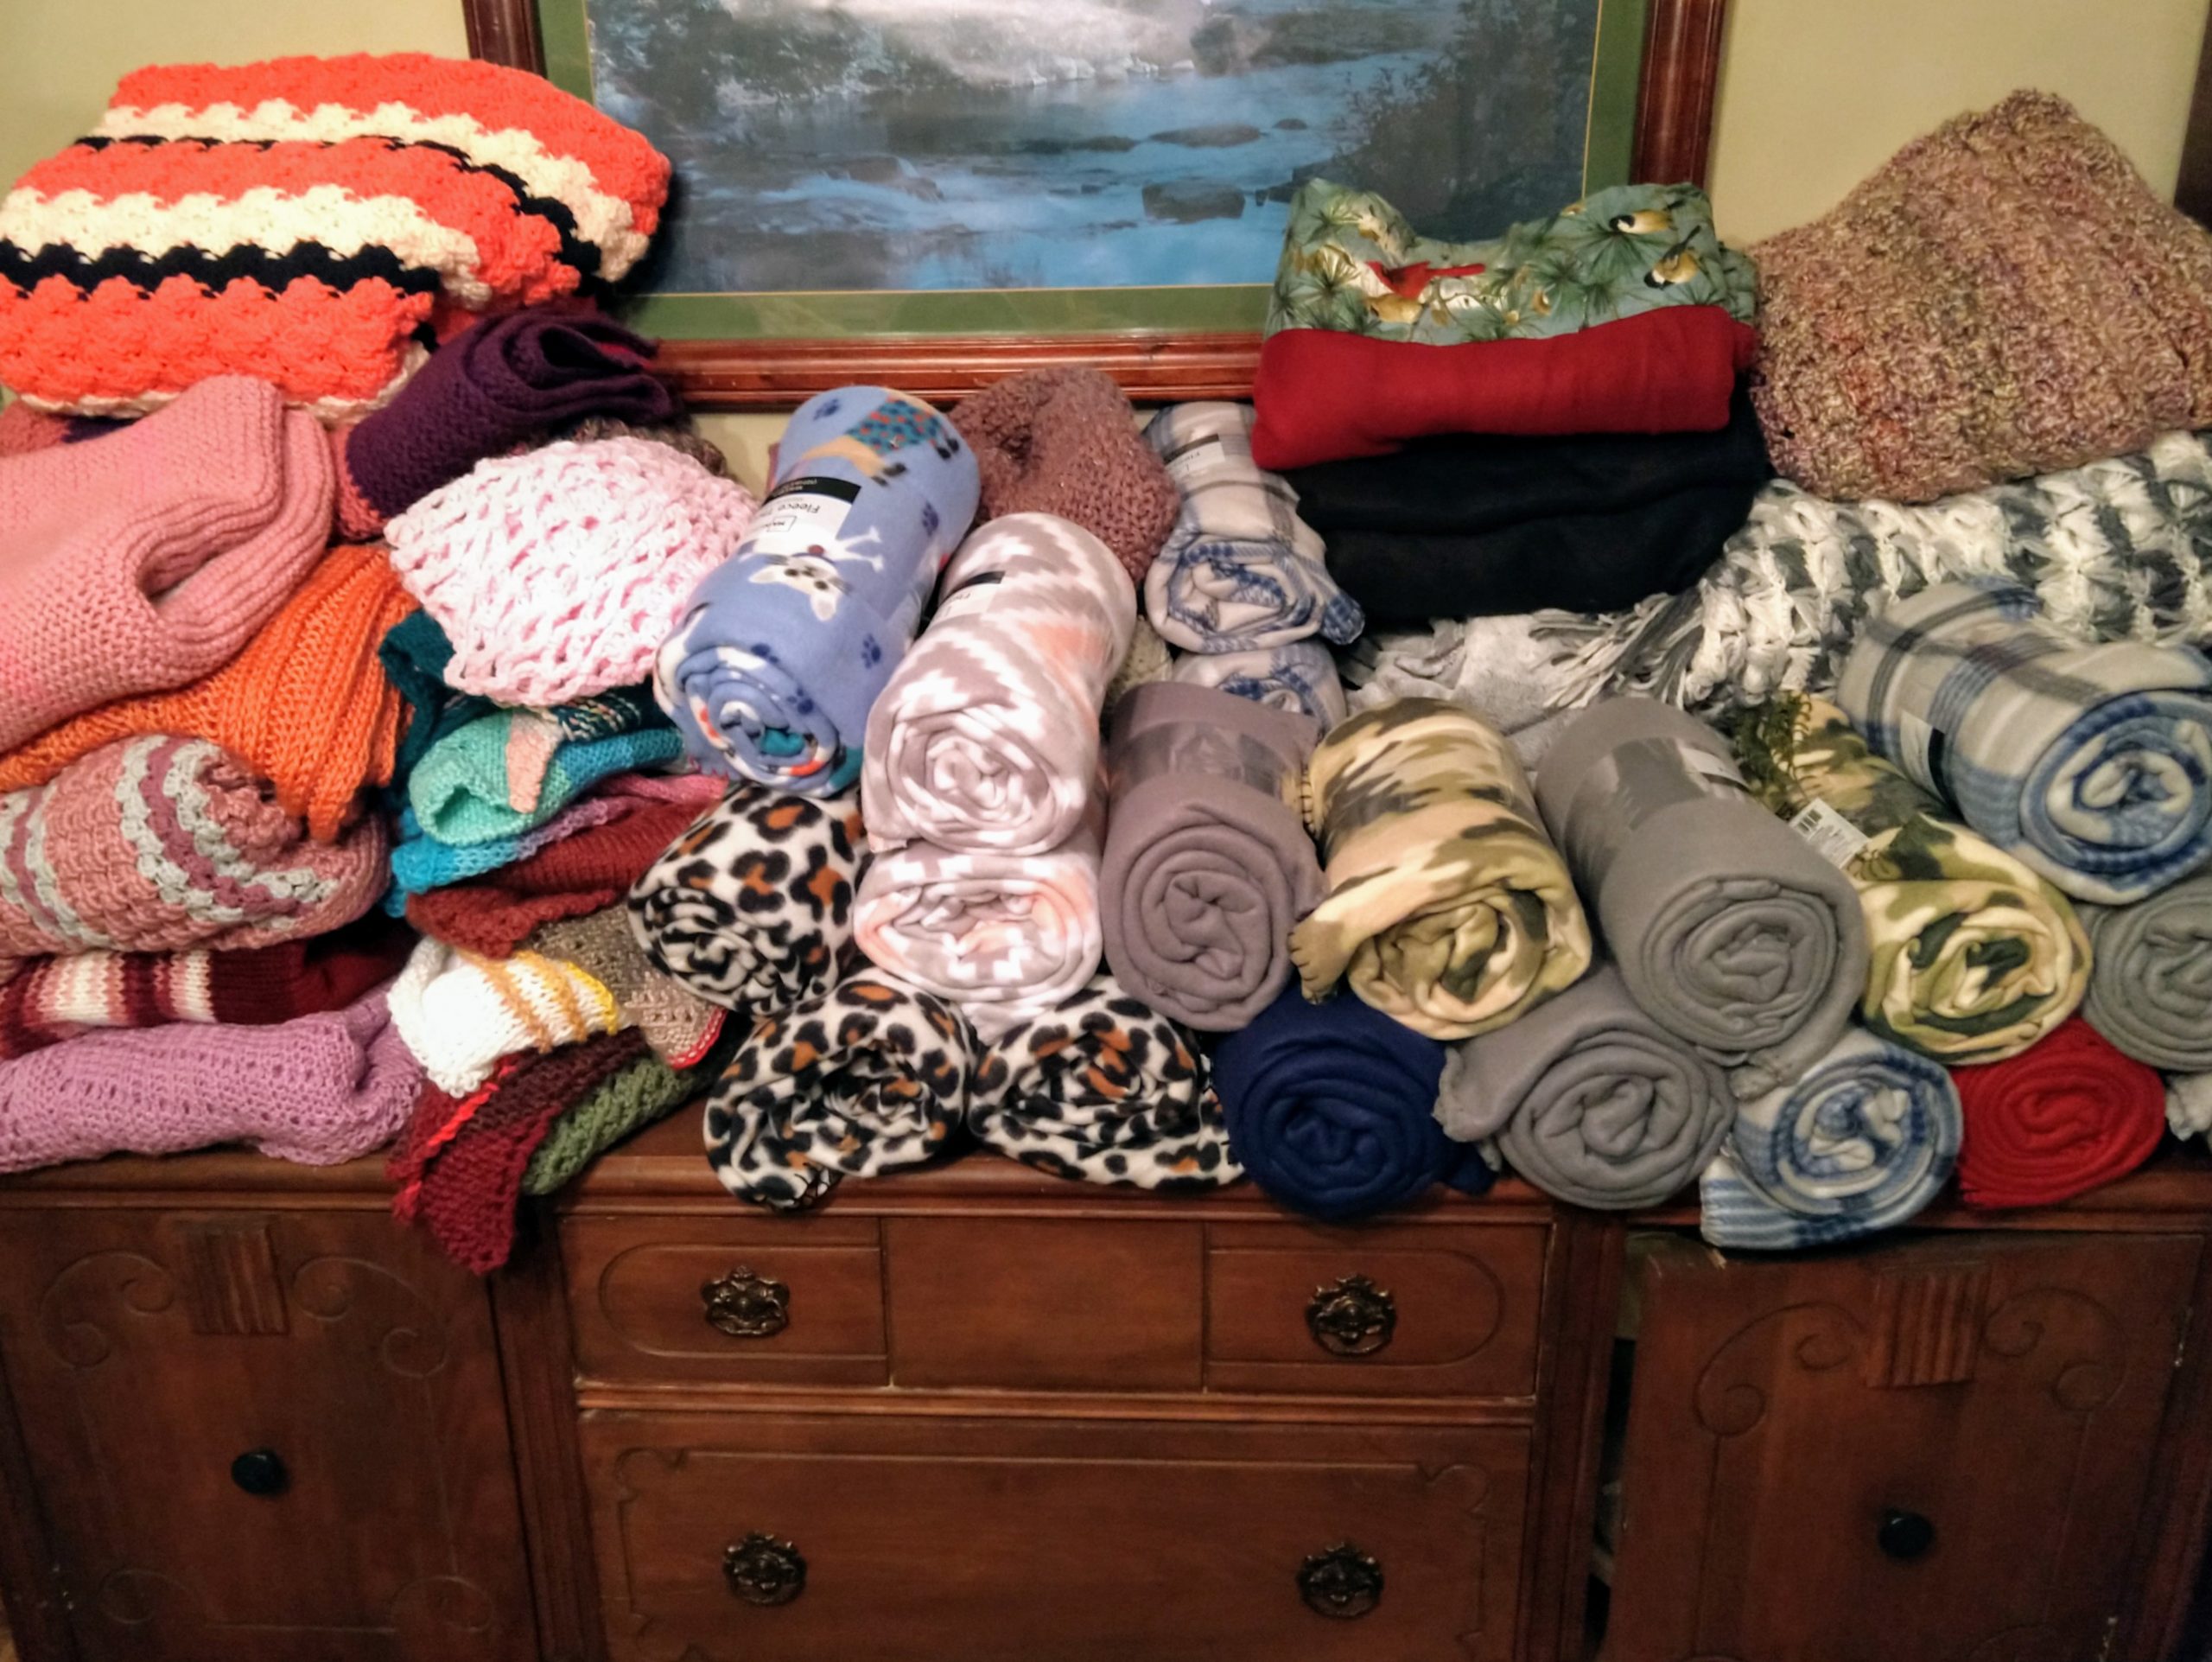 Donated blankets